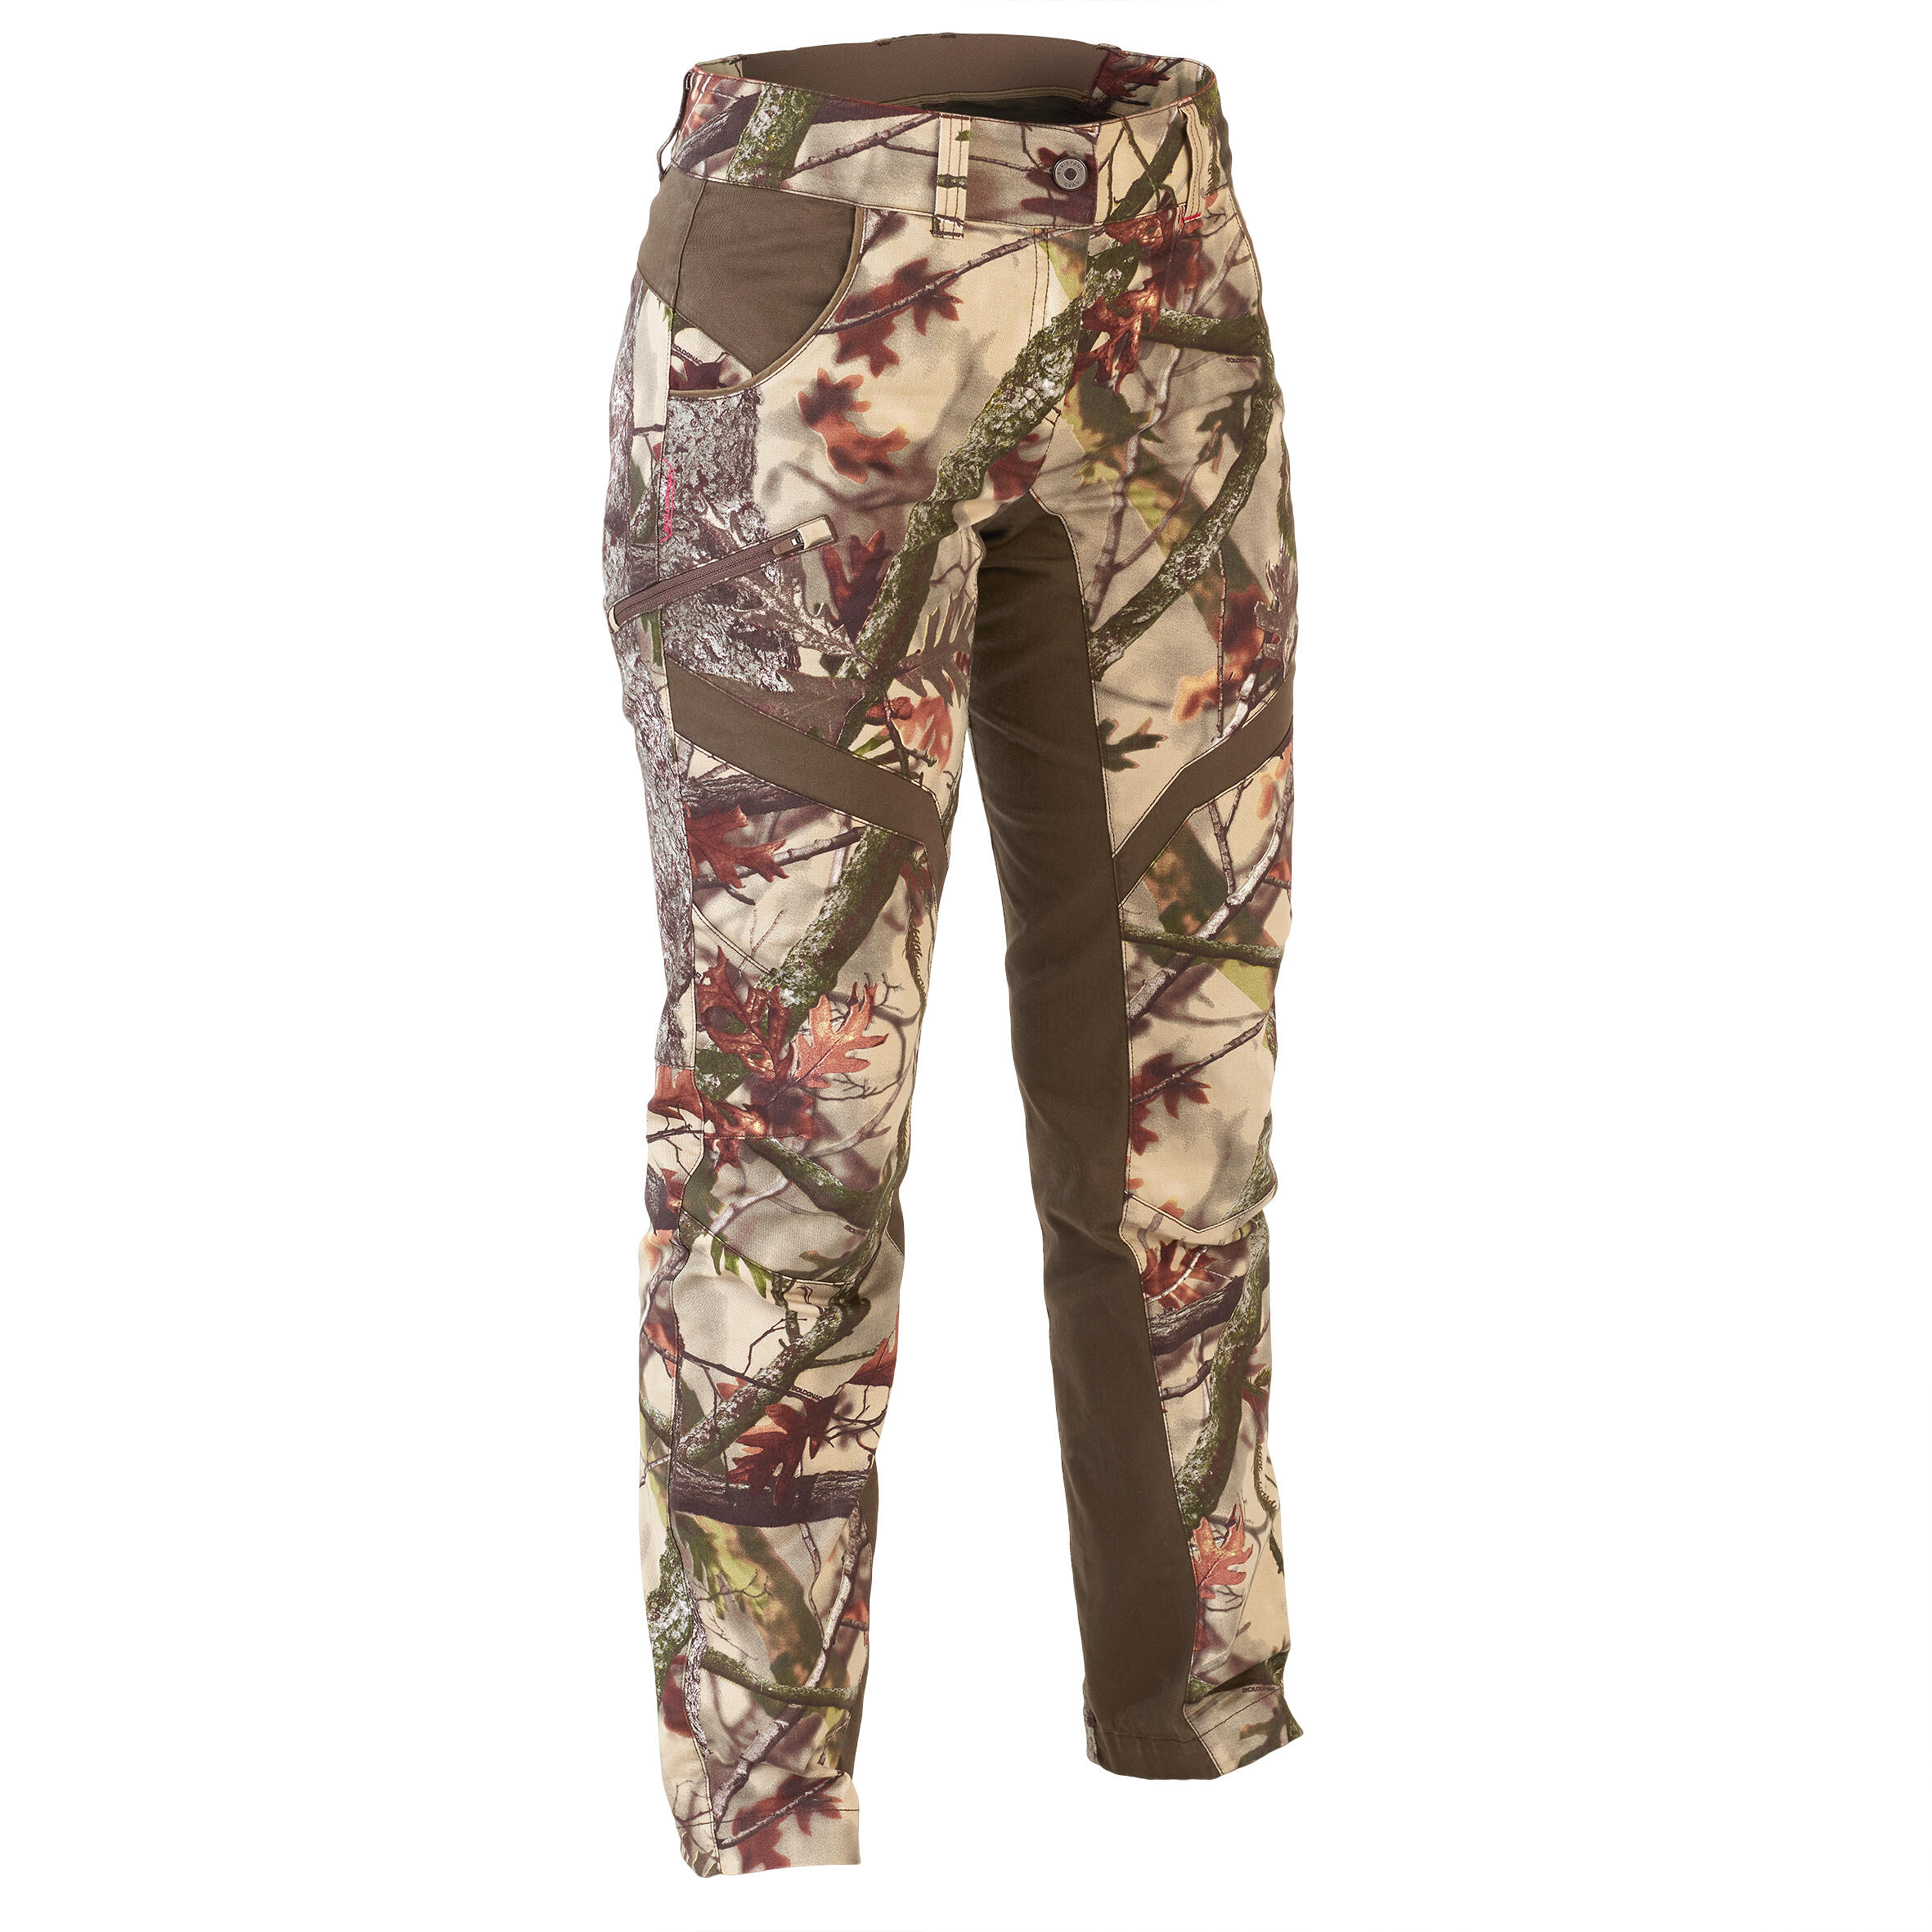 SOLOGNAC STEPPE 300 TROUSERS - YouTube